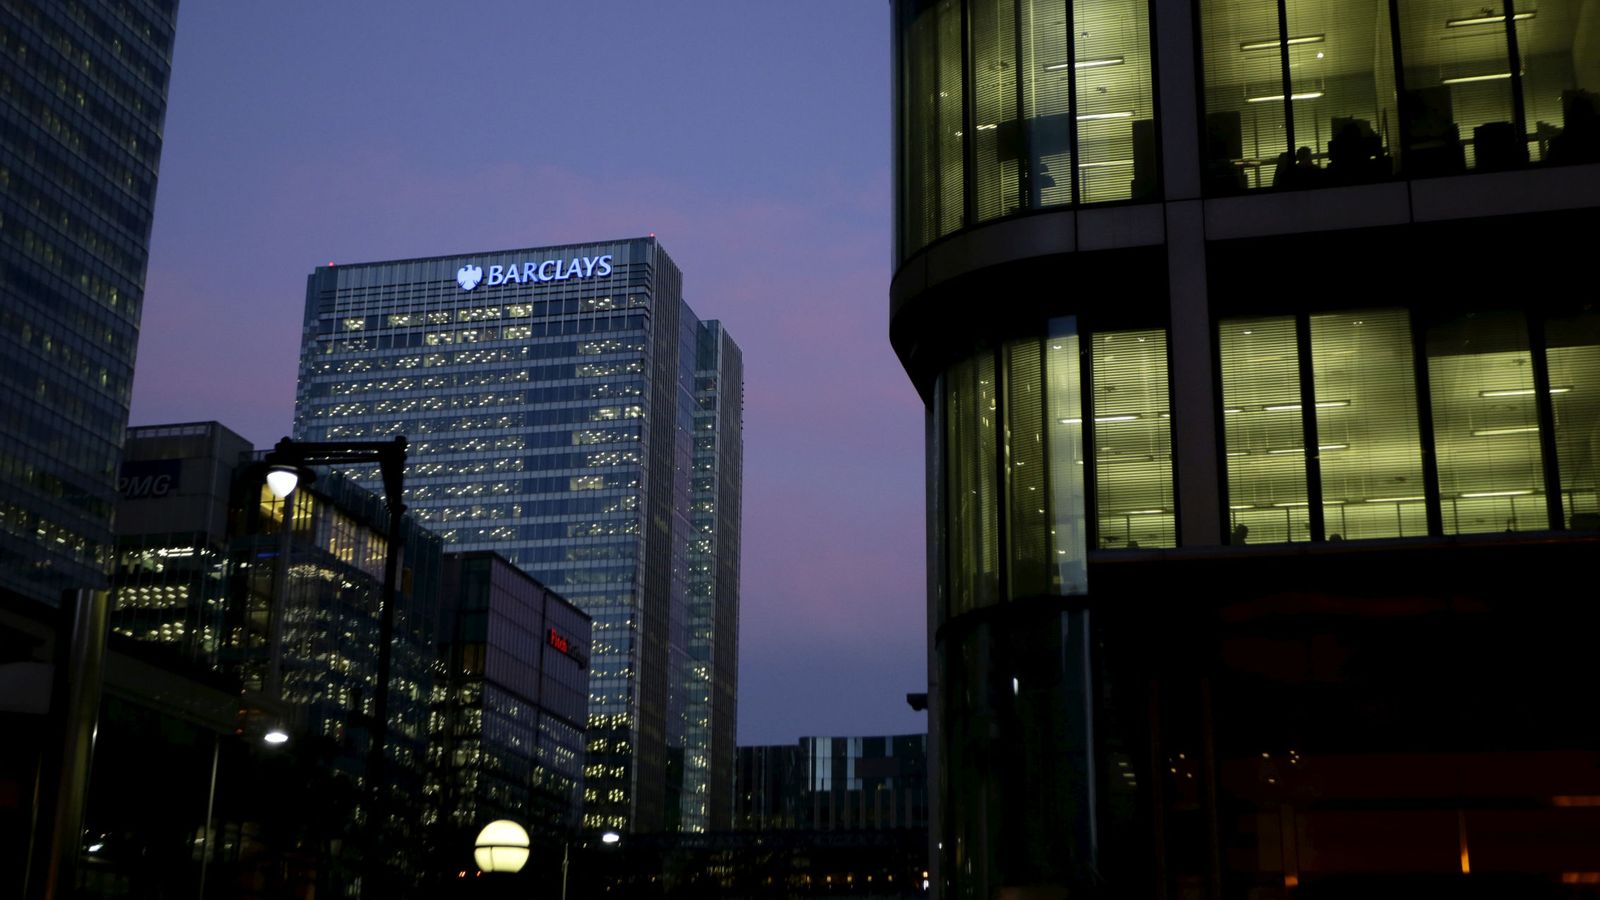 Foto: The barclays bank building is seen in canary wharf, london